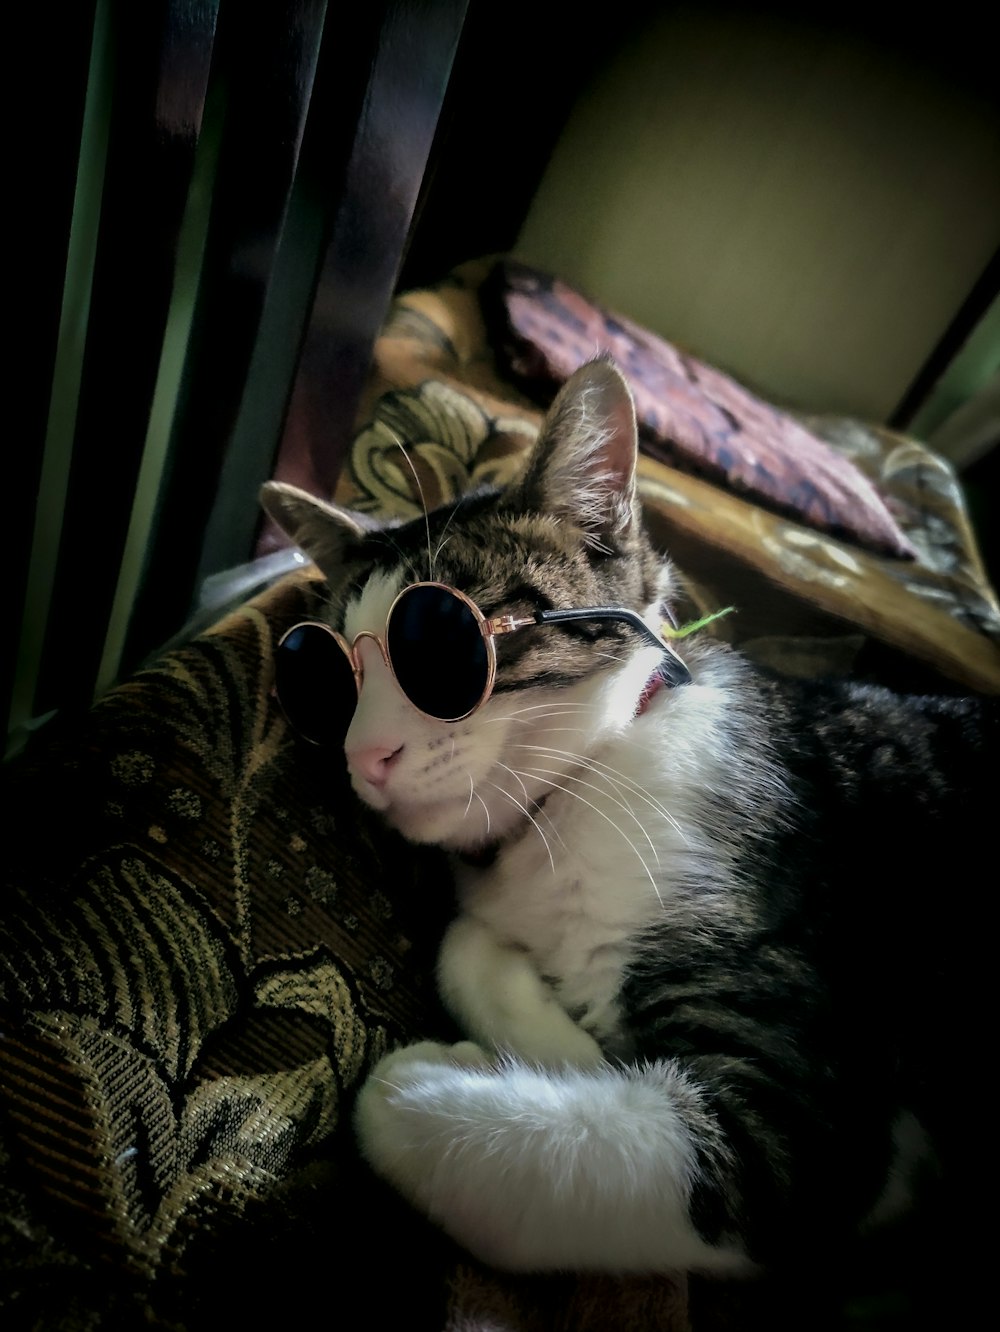 Cat With Glasses Pictures | Download Free Images on Unsplash